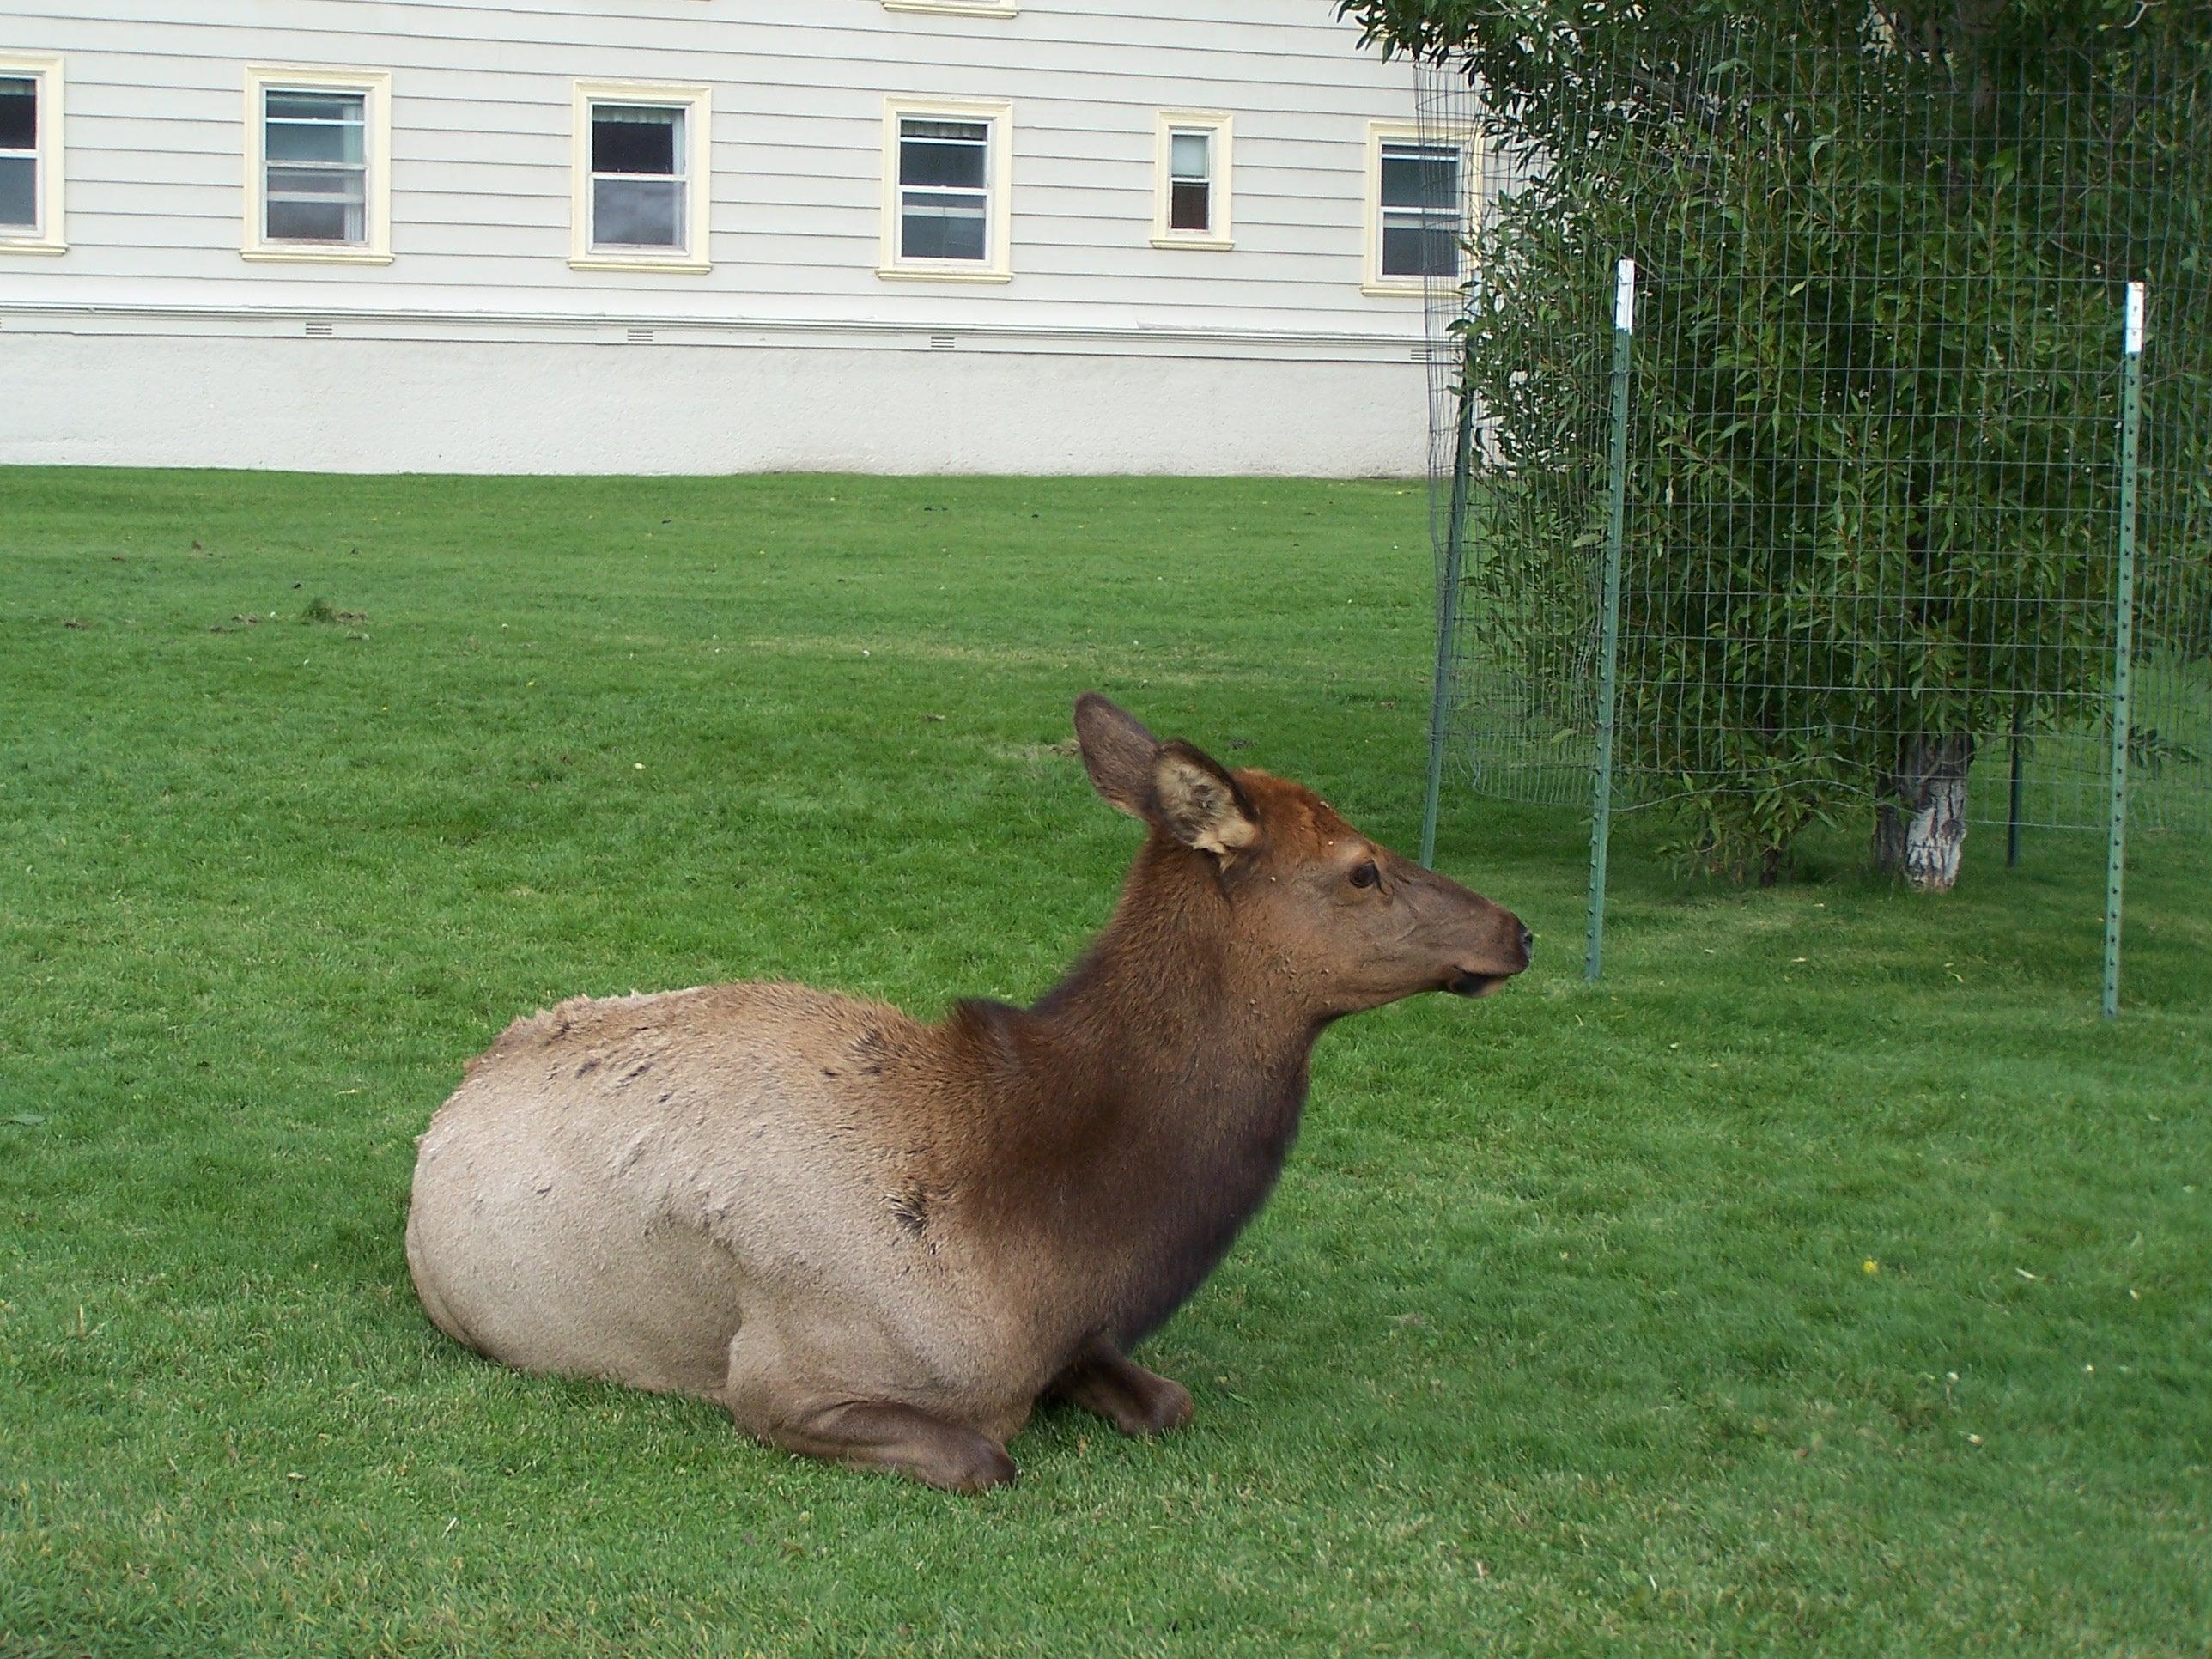 Female Elk laying in the grass